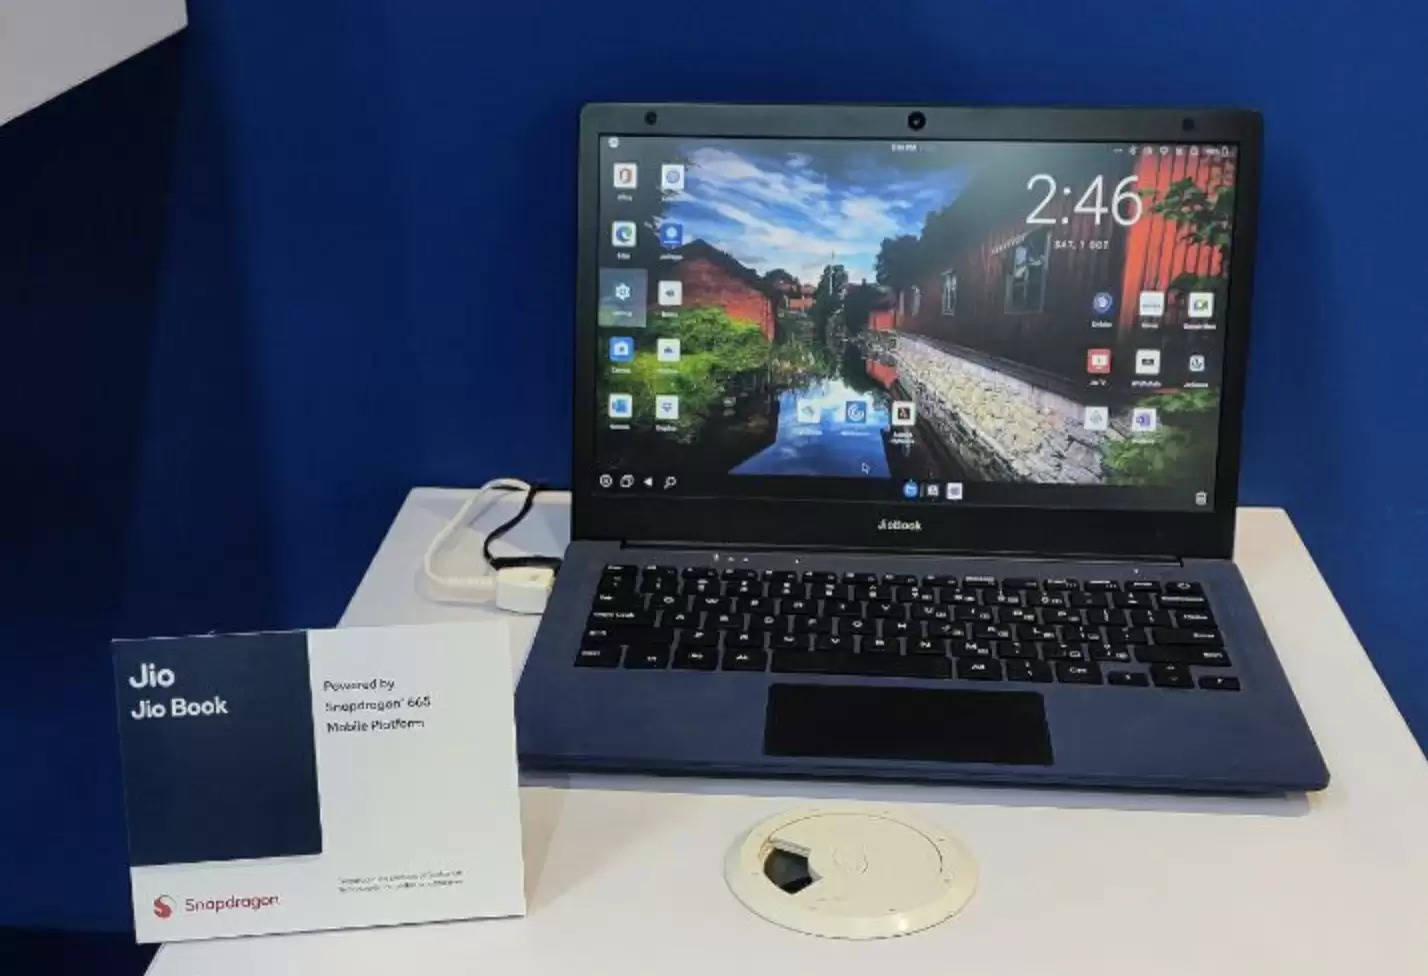 Reliance JioBook laptop may be priced around Rs 15,000; A quick overview of leaked specs